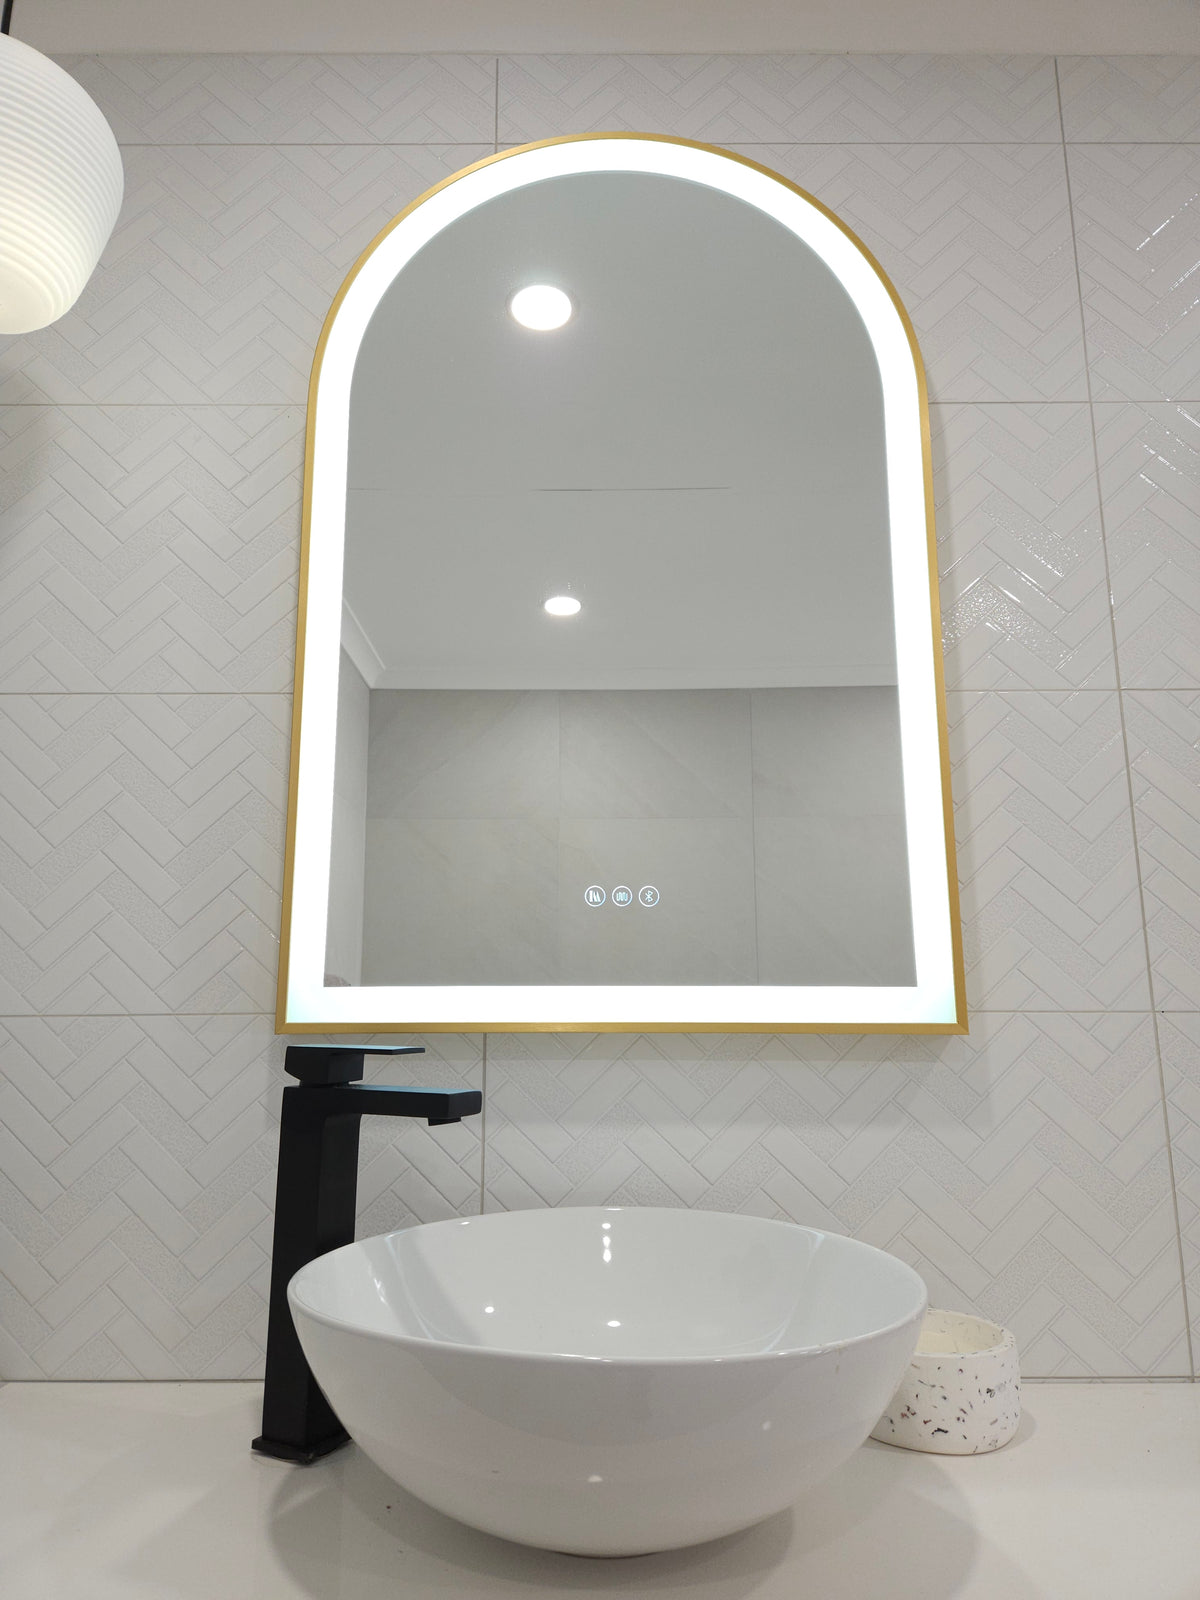 Front View of Gold-Framed Arch-Shaped Mirror in White Powder Room